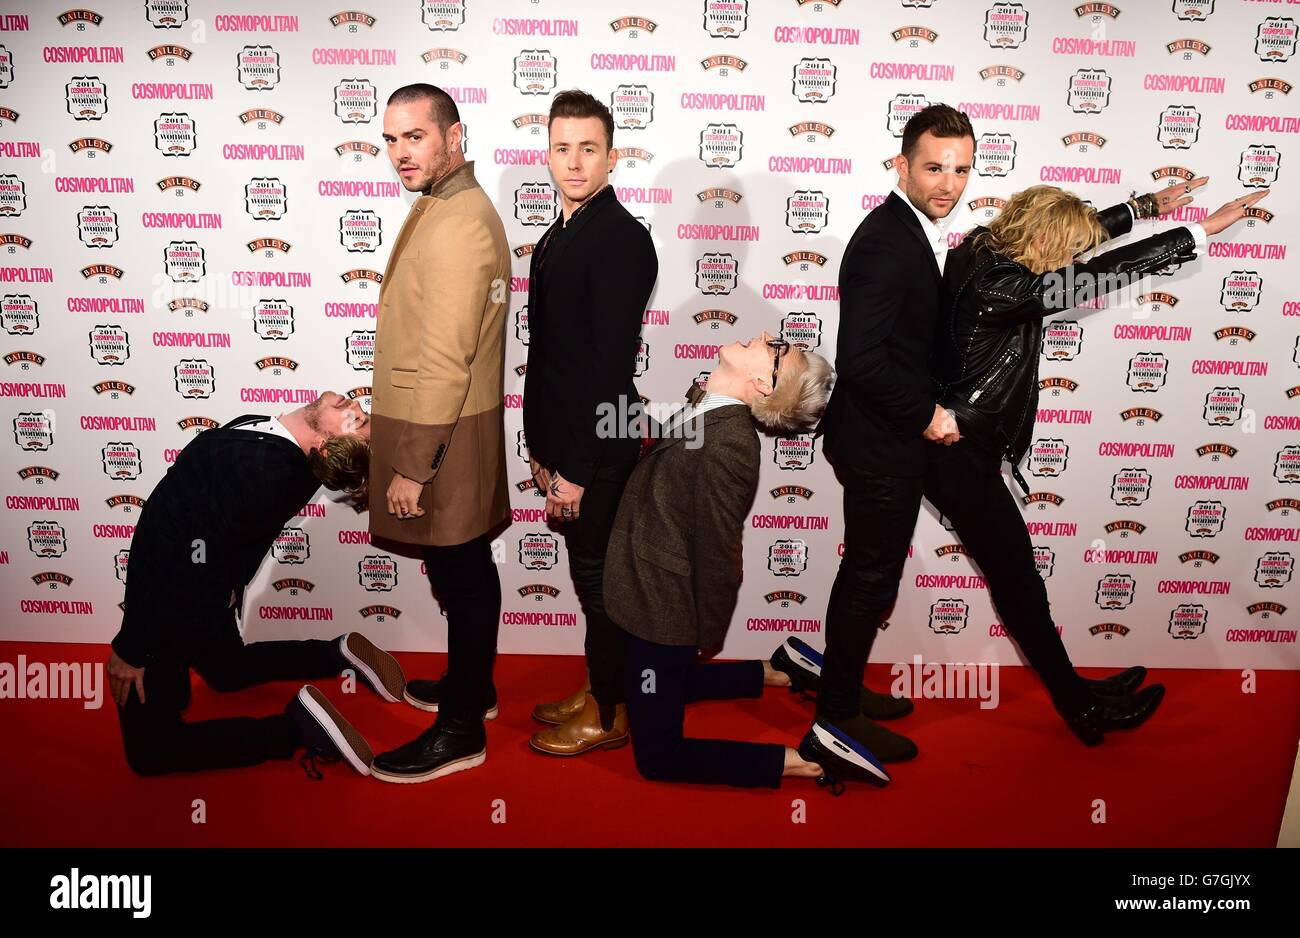 (left to right) James Bourne, Matt Willis, Danny Jones, Tom Fletcher, Harry Judd and Dougie Poynter of McBusted, attend the Cosmopolitan Ultimate Women of the Year Awards at One Mayfair in London. Stock Photo